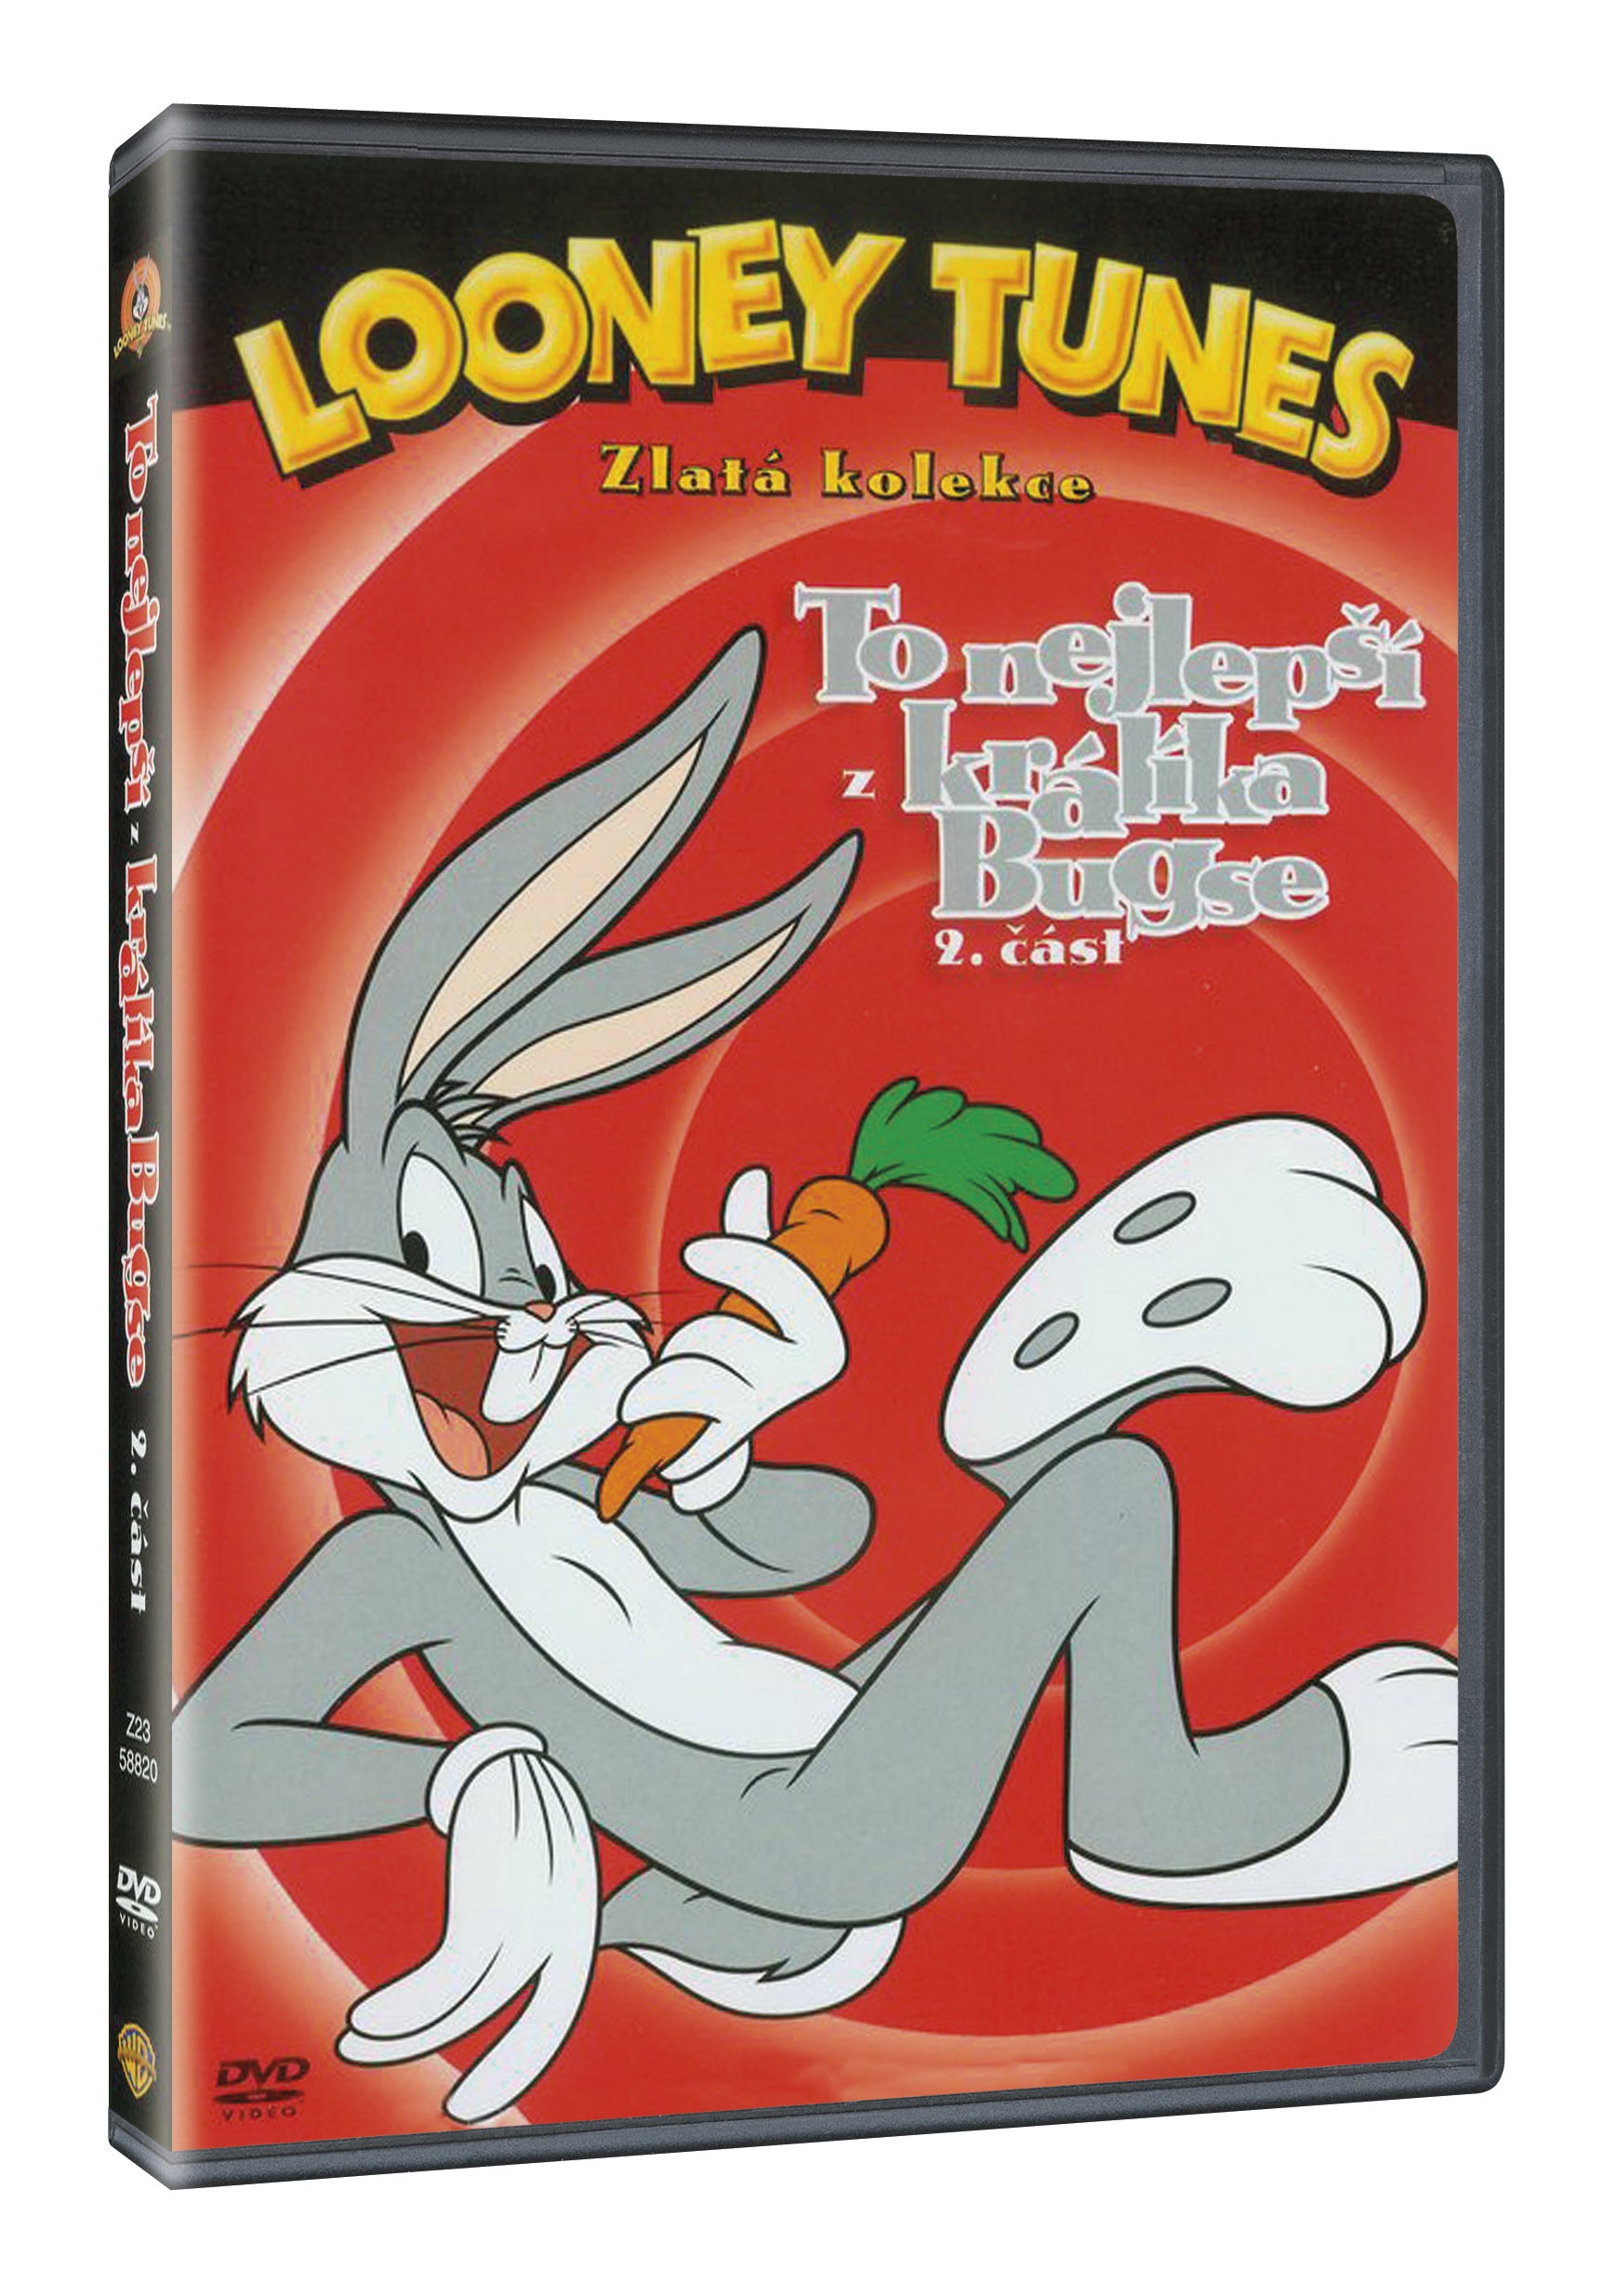 Looney Tunes: To nejlepsi z Kralika Bugse 2 DVD / Looney Tunes -The Best of Bugs Bunny